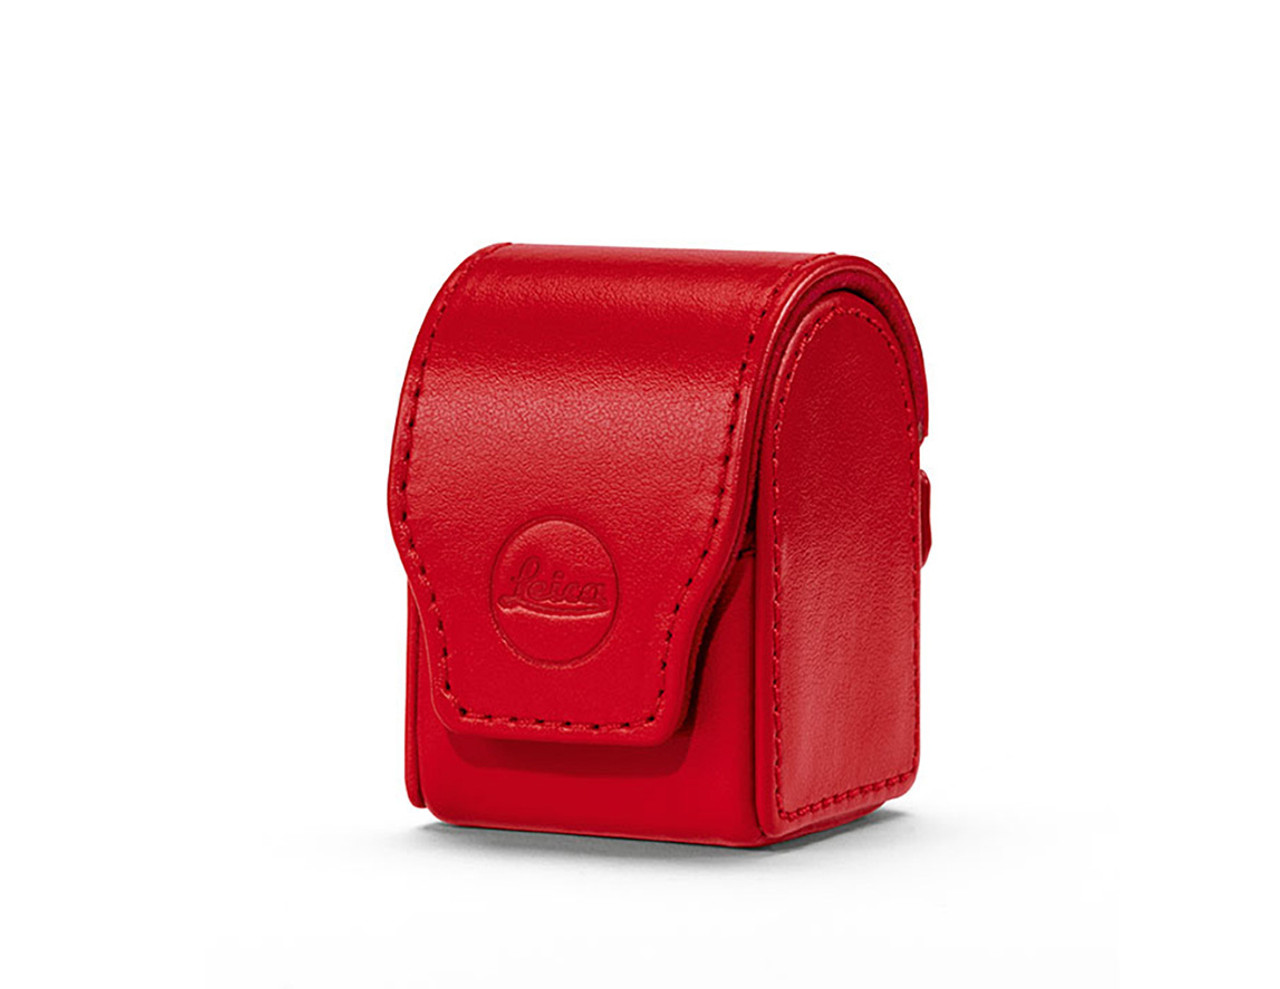  Leica Case with Carrying Strap for D-Lux 7 Compact Camera, Red  : Electronics